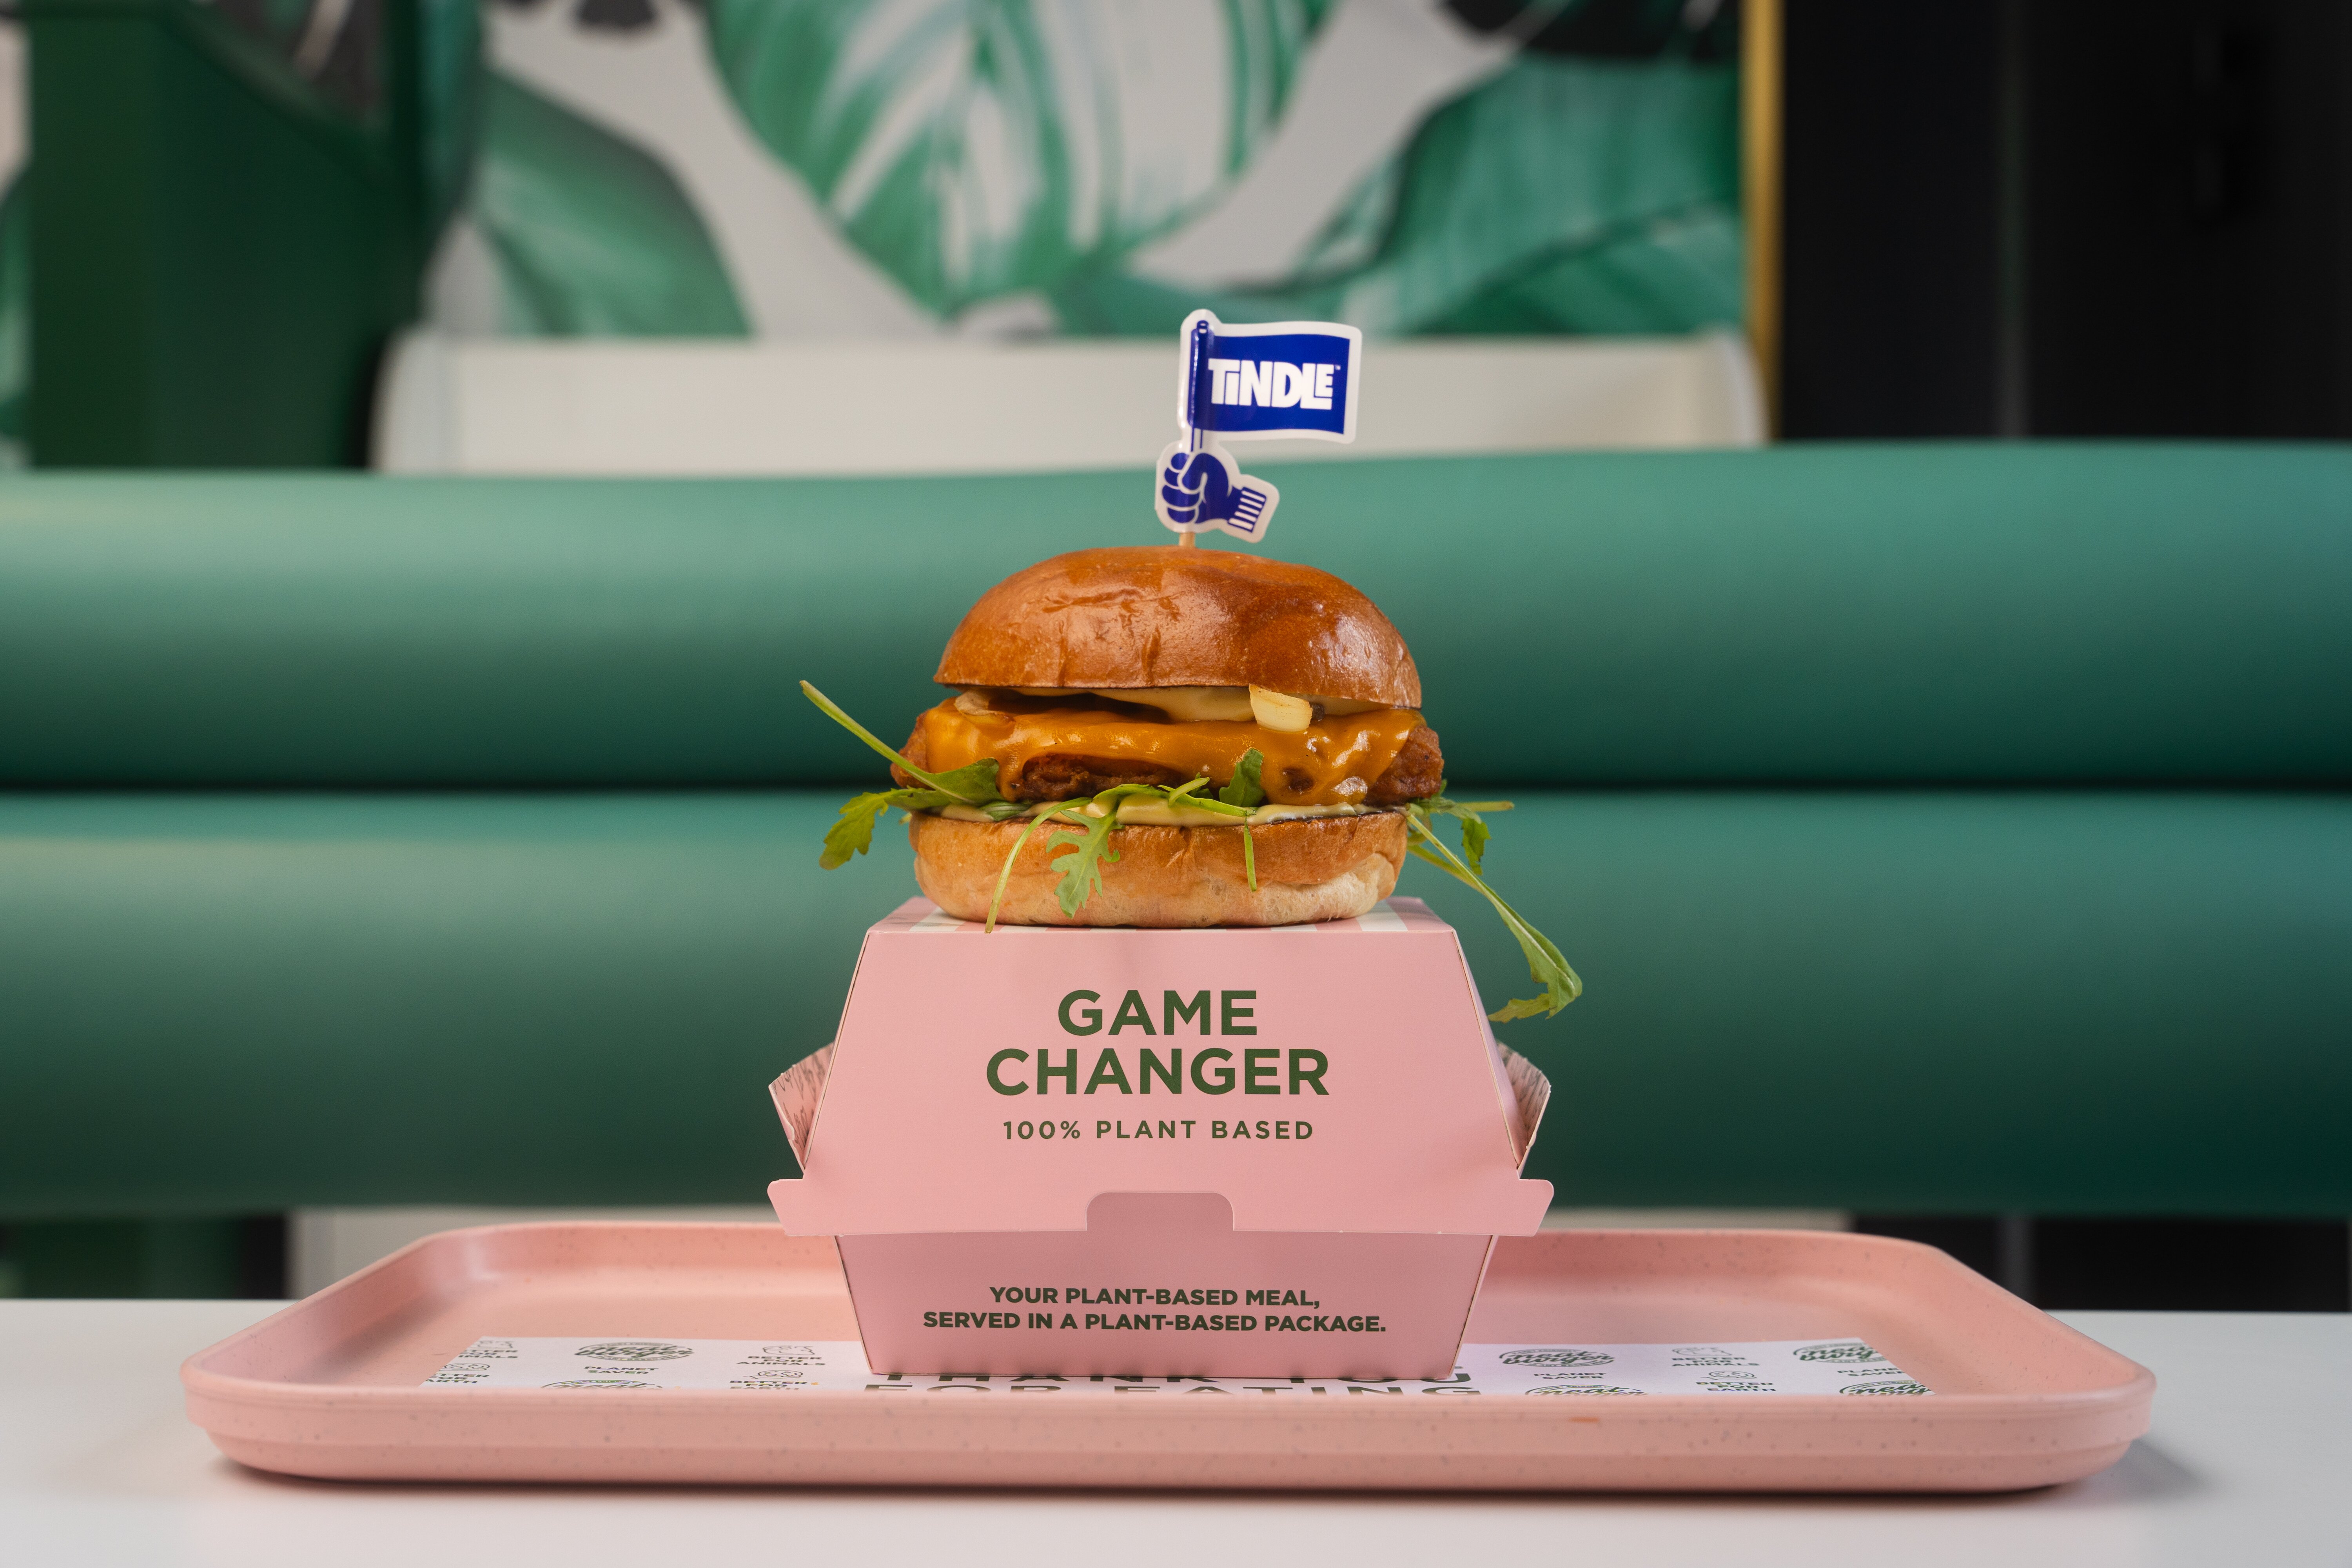 Plant-based brand TiNDLE secures new partnership with Neat Burger 